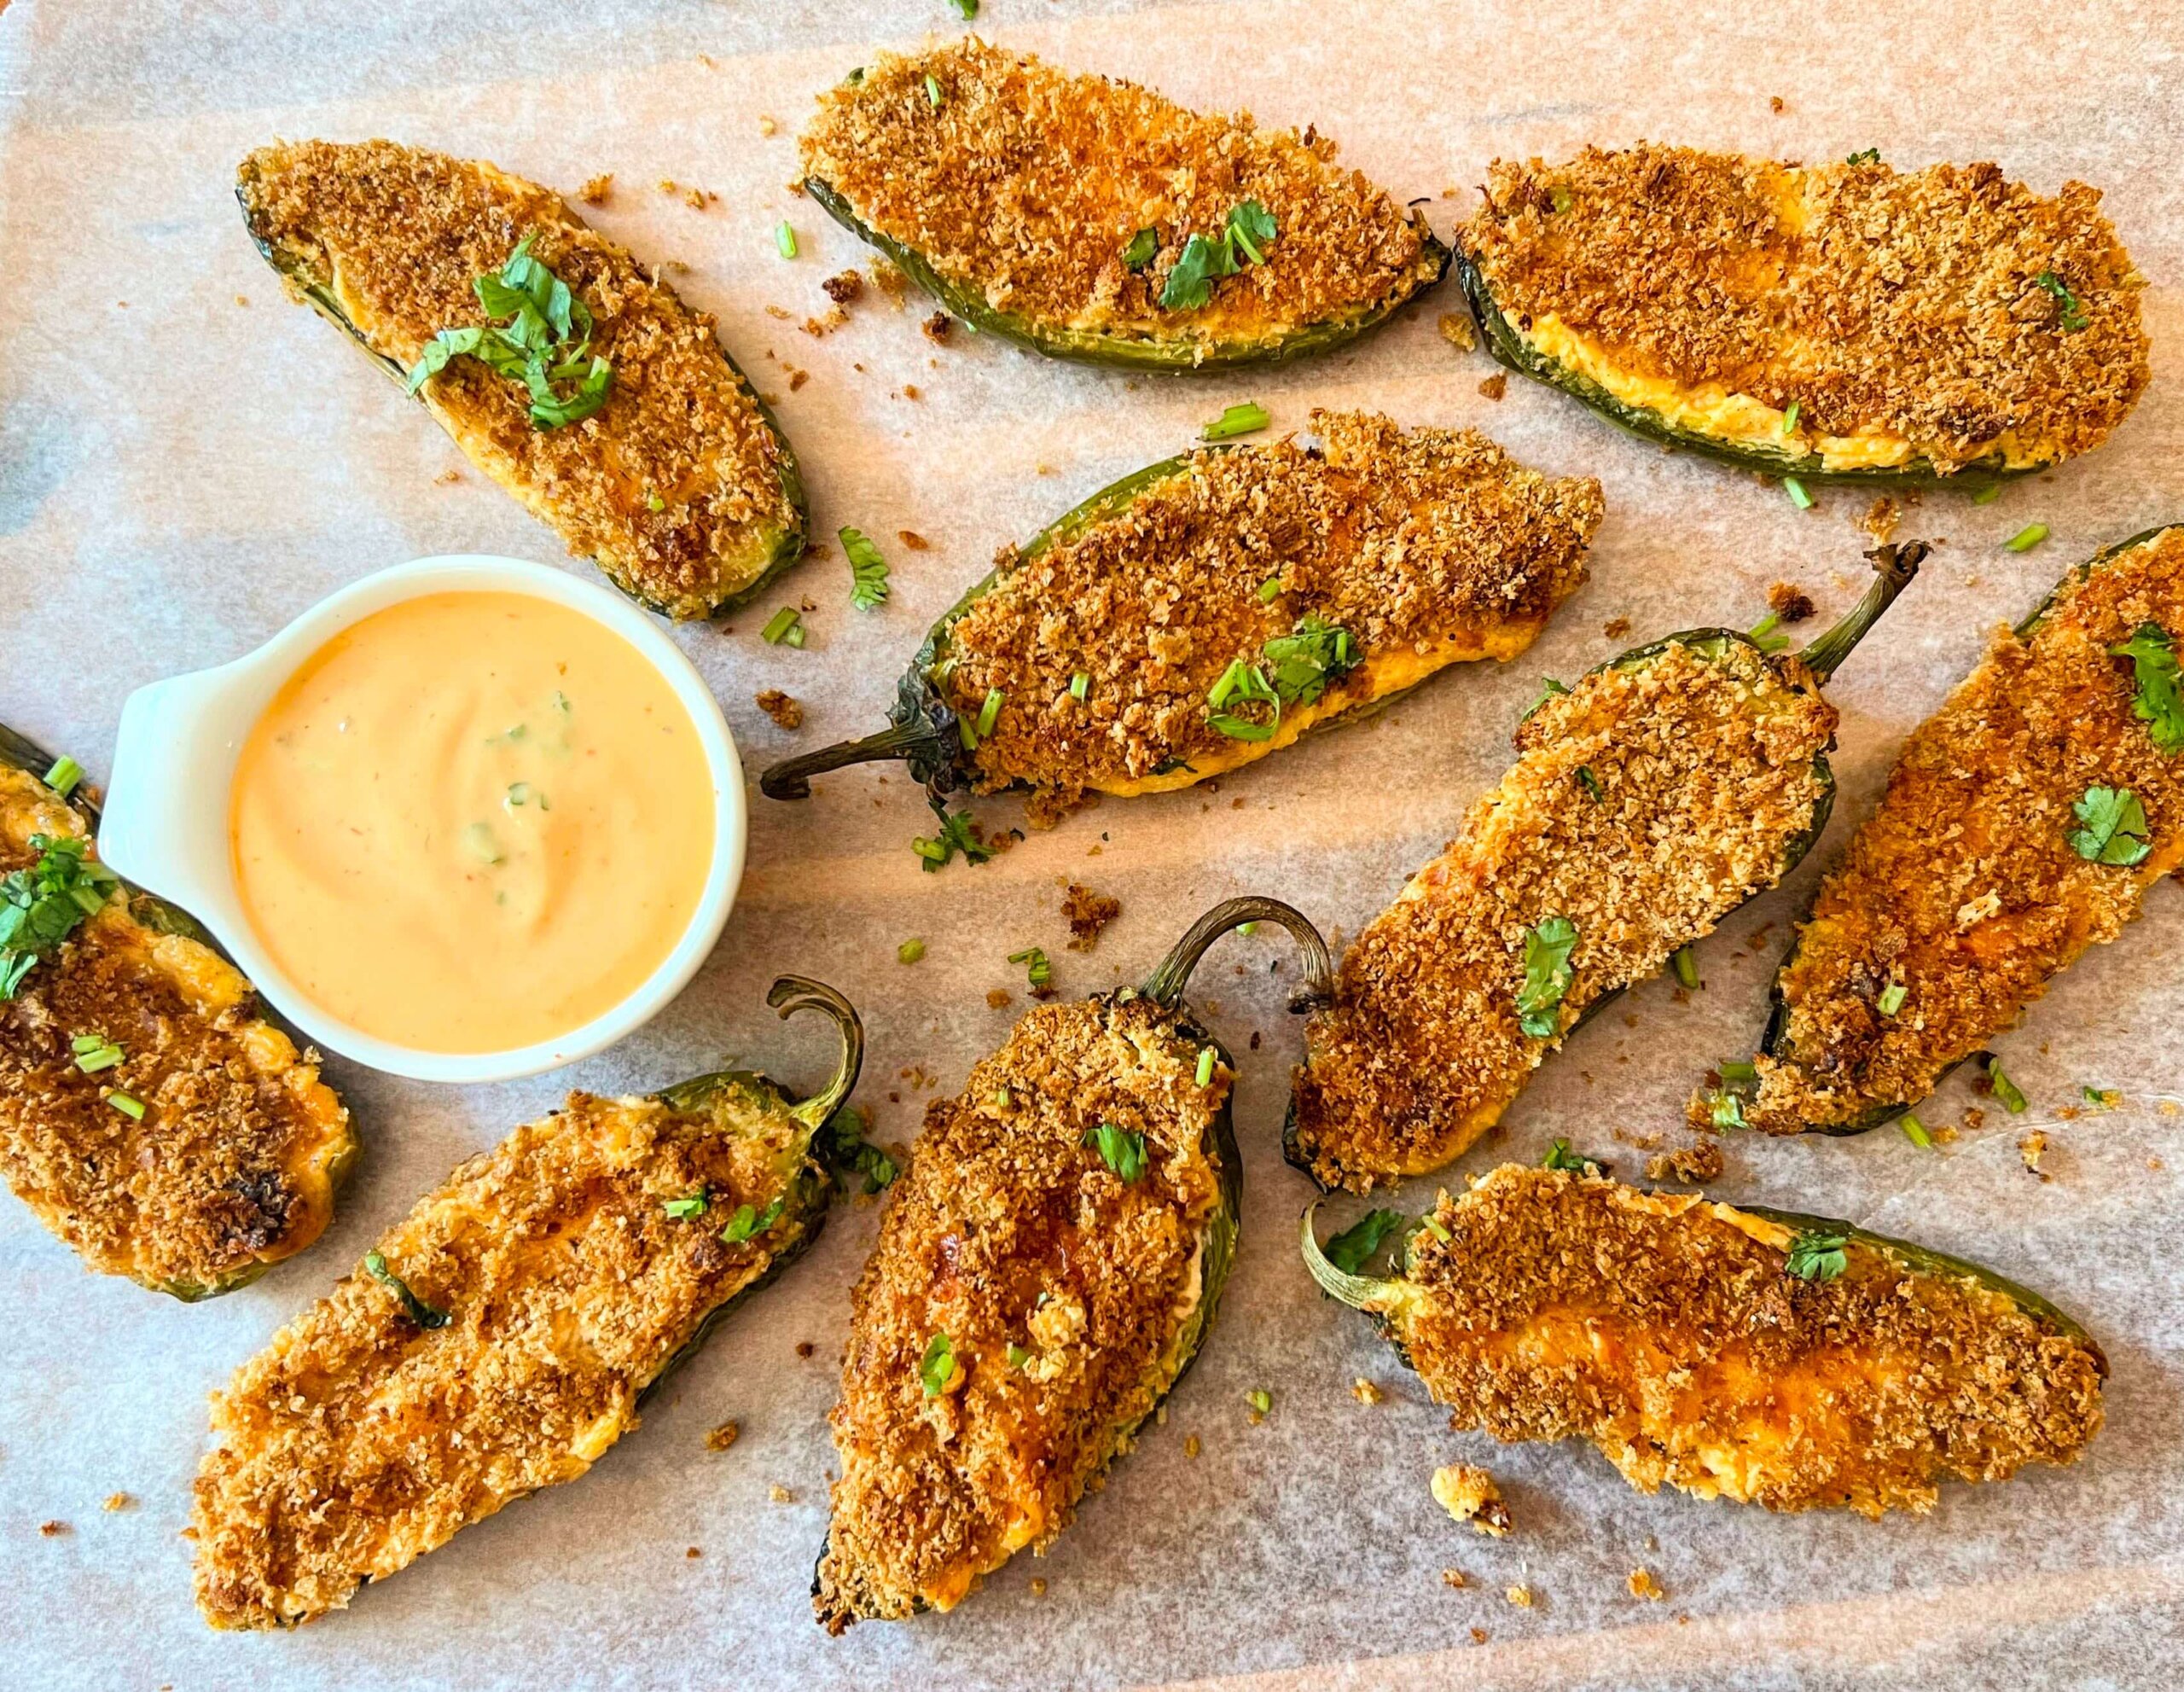 Jalapeno Poppers Recipe Step By Step Instructions